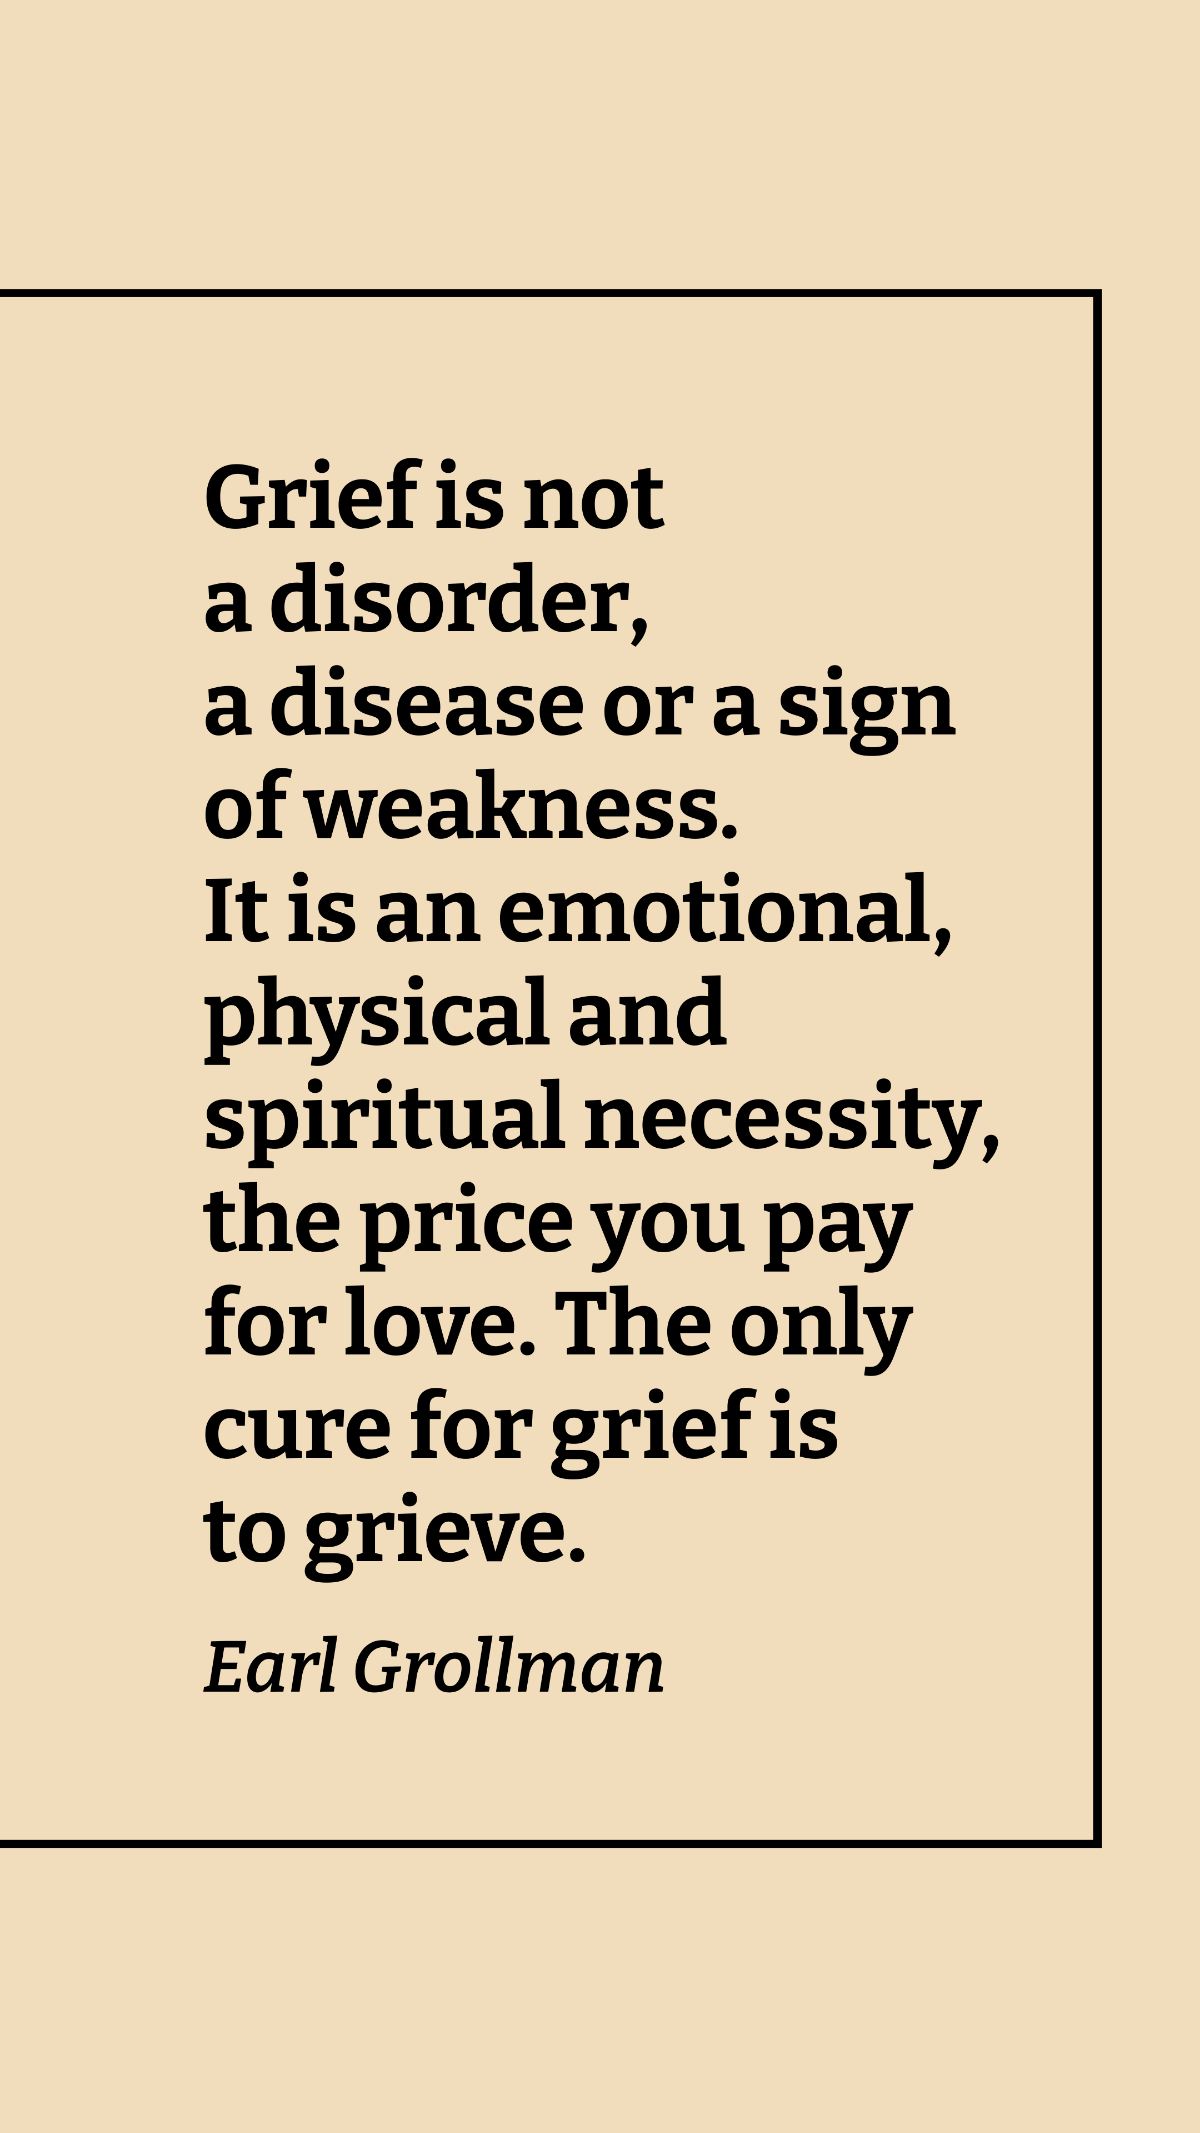 Free Earl Grollman - Grief is not a disorder, a disease or a sign of weakness. It is an emotional, physical and spiritual necessity, the price you pay for love. The only cure for grief is to grieve. Templa